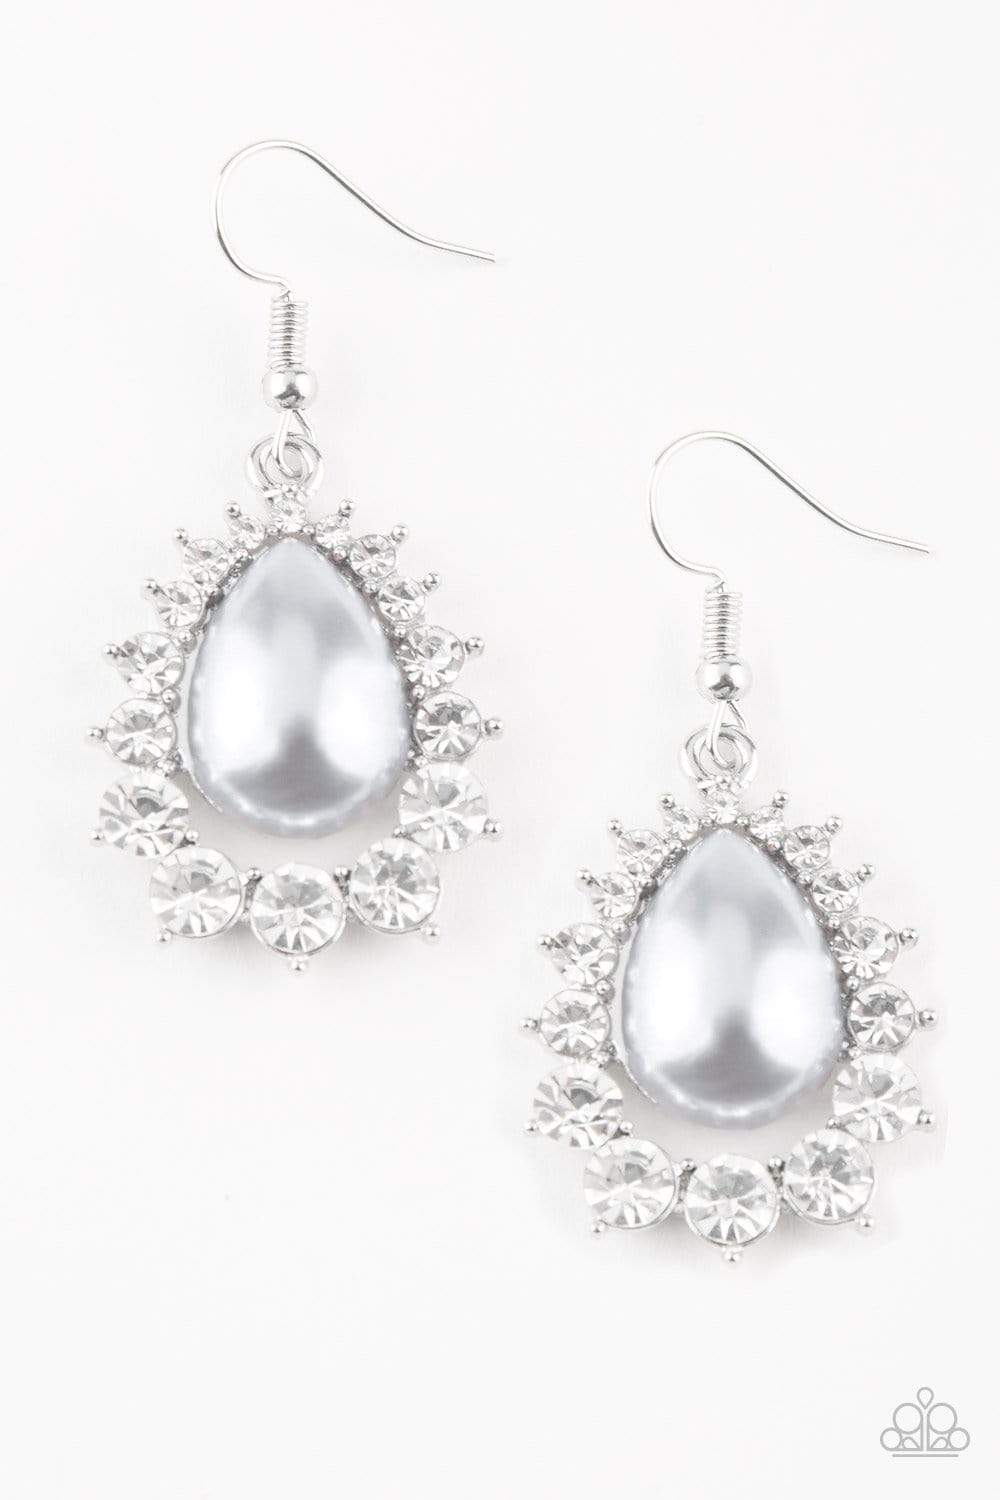 Paparazzi - High End Elegance White Earrings Paparazzi Accessories  Vivacious Bombshell Bling Jenny and James Davison – Vivacious Bombshell  Bling, LLC, Jenny and James Davison